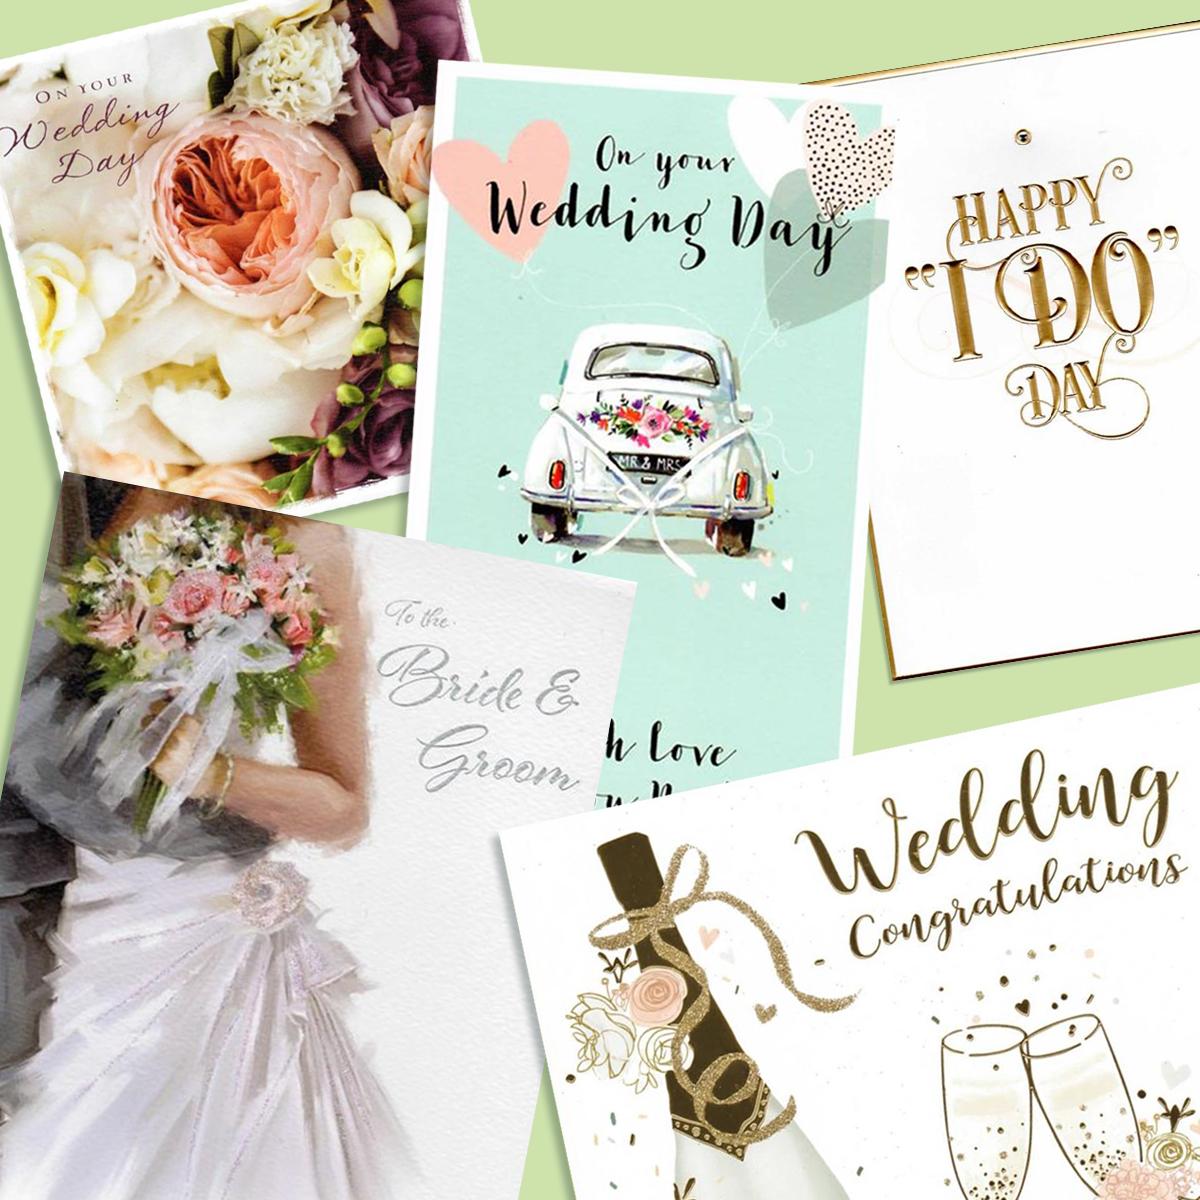 A Selection Of Cards To Show The Depth Of Range In Our Wedding Day Cards Section